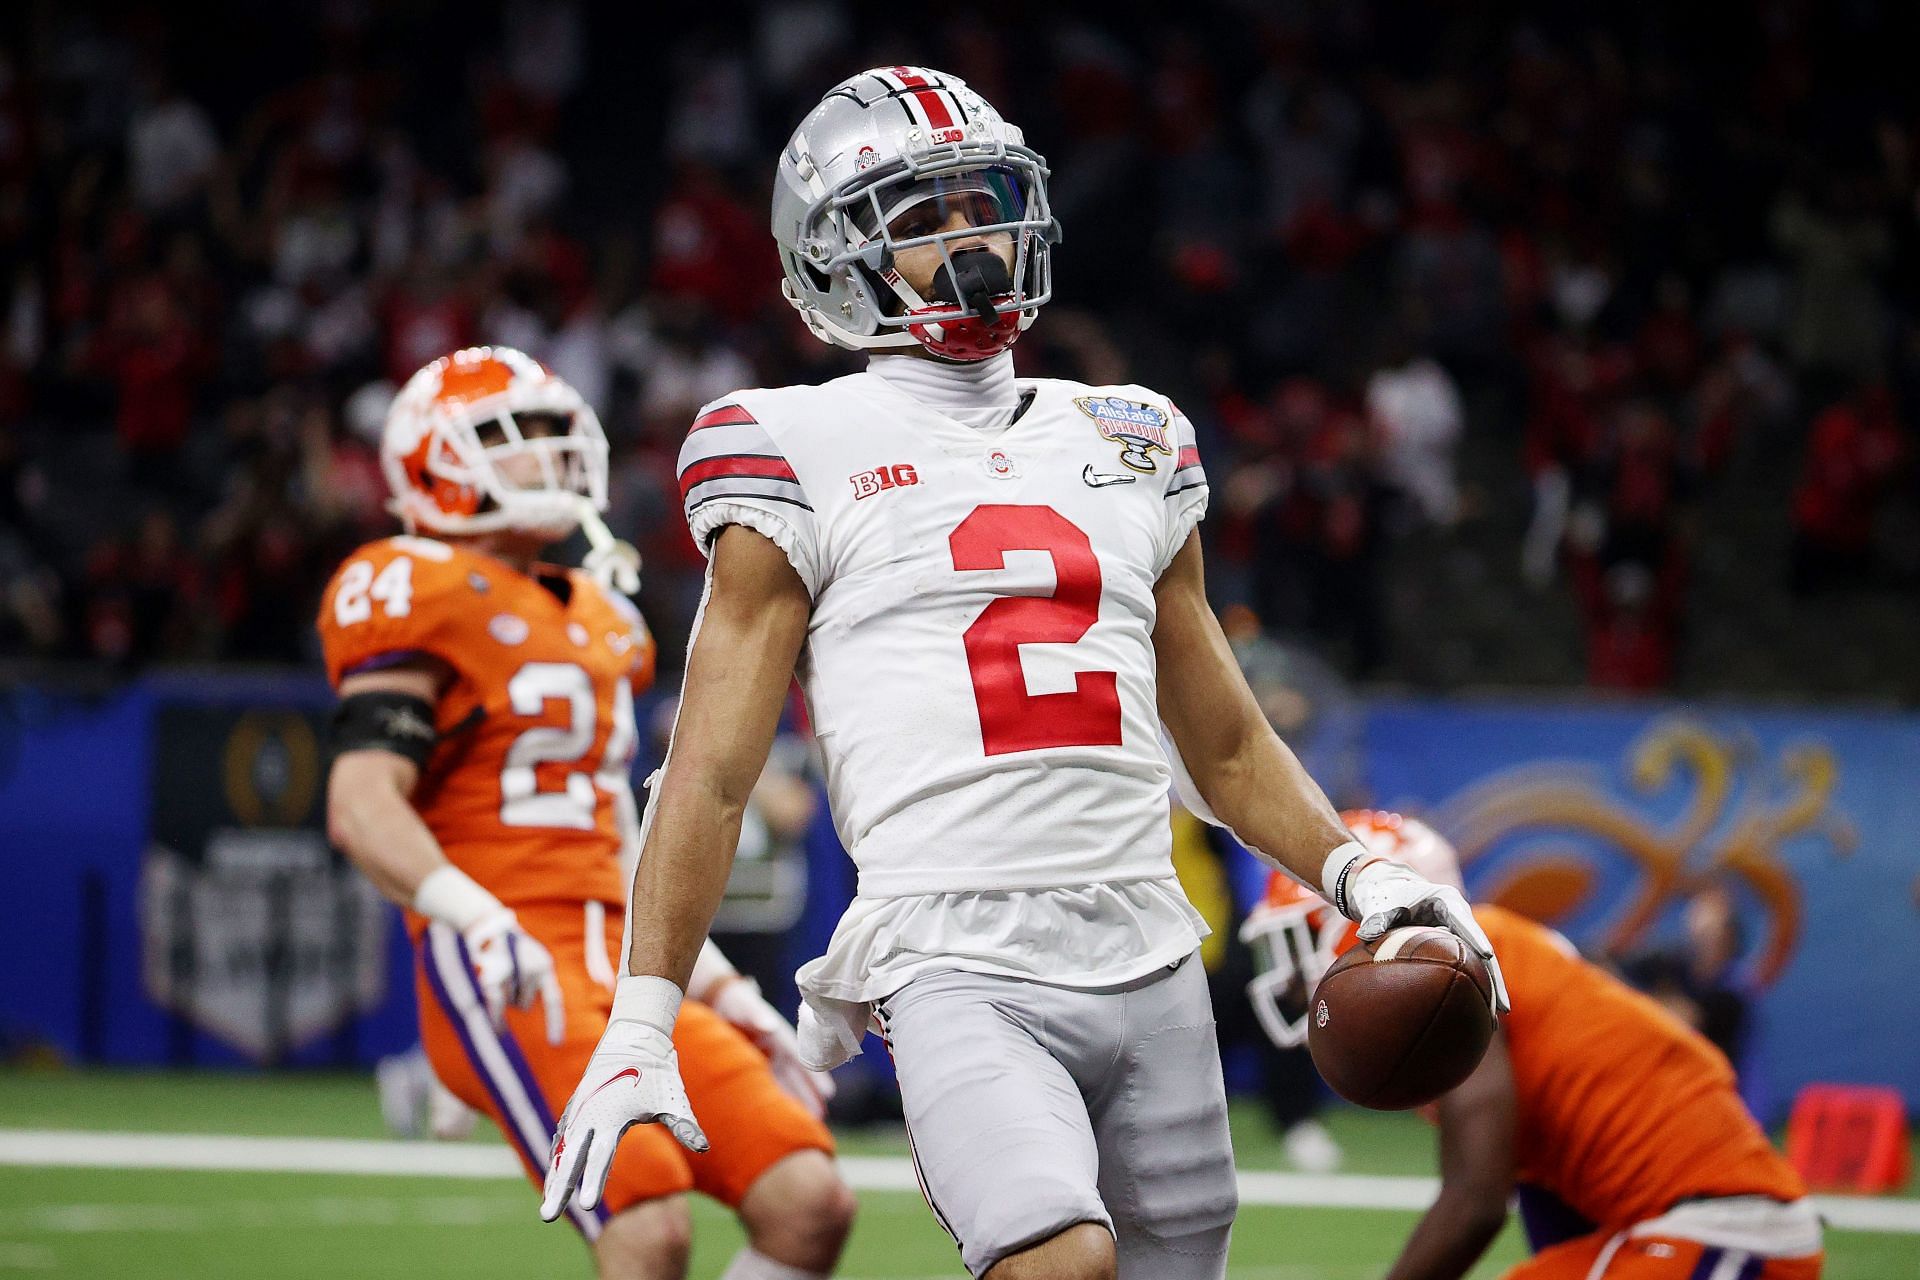 2022 NFL Mock Draft: A pair of receivers go in the top 10